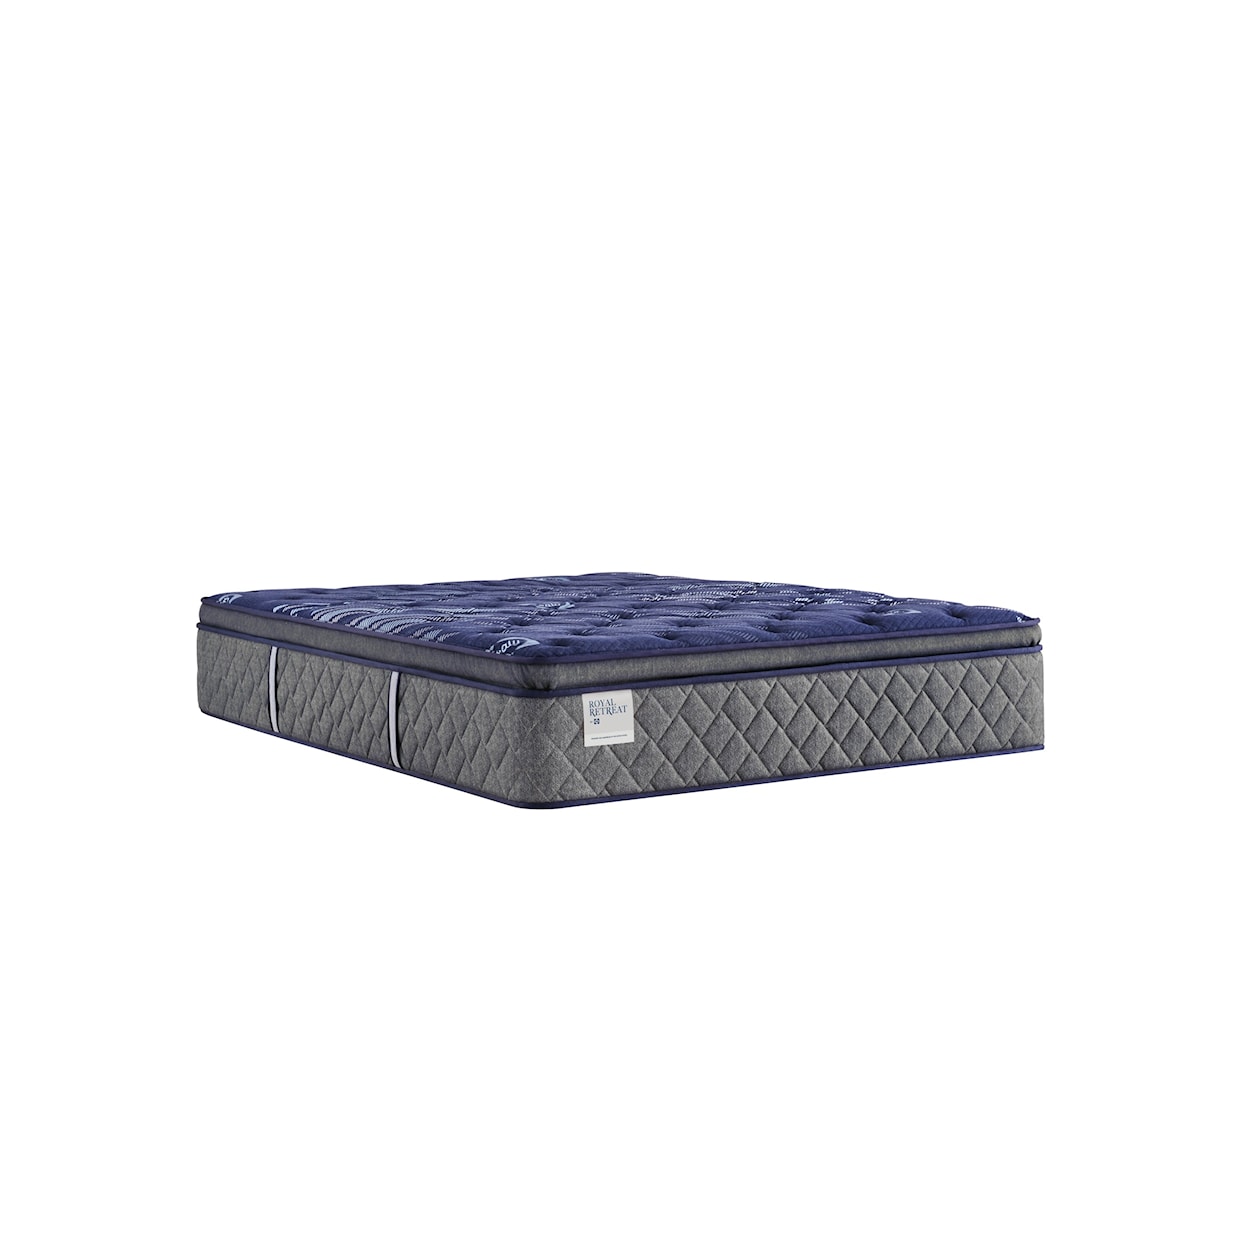 Sealy Royal Retreat S8 Queenstown  Soft EPT King Mattress